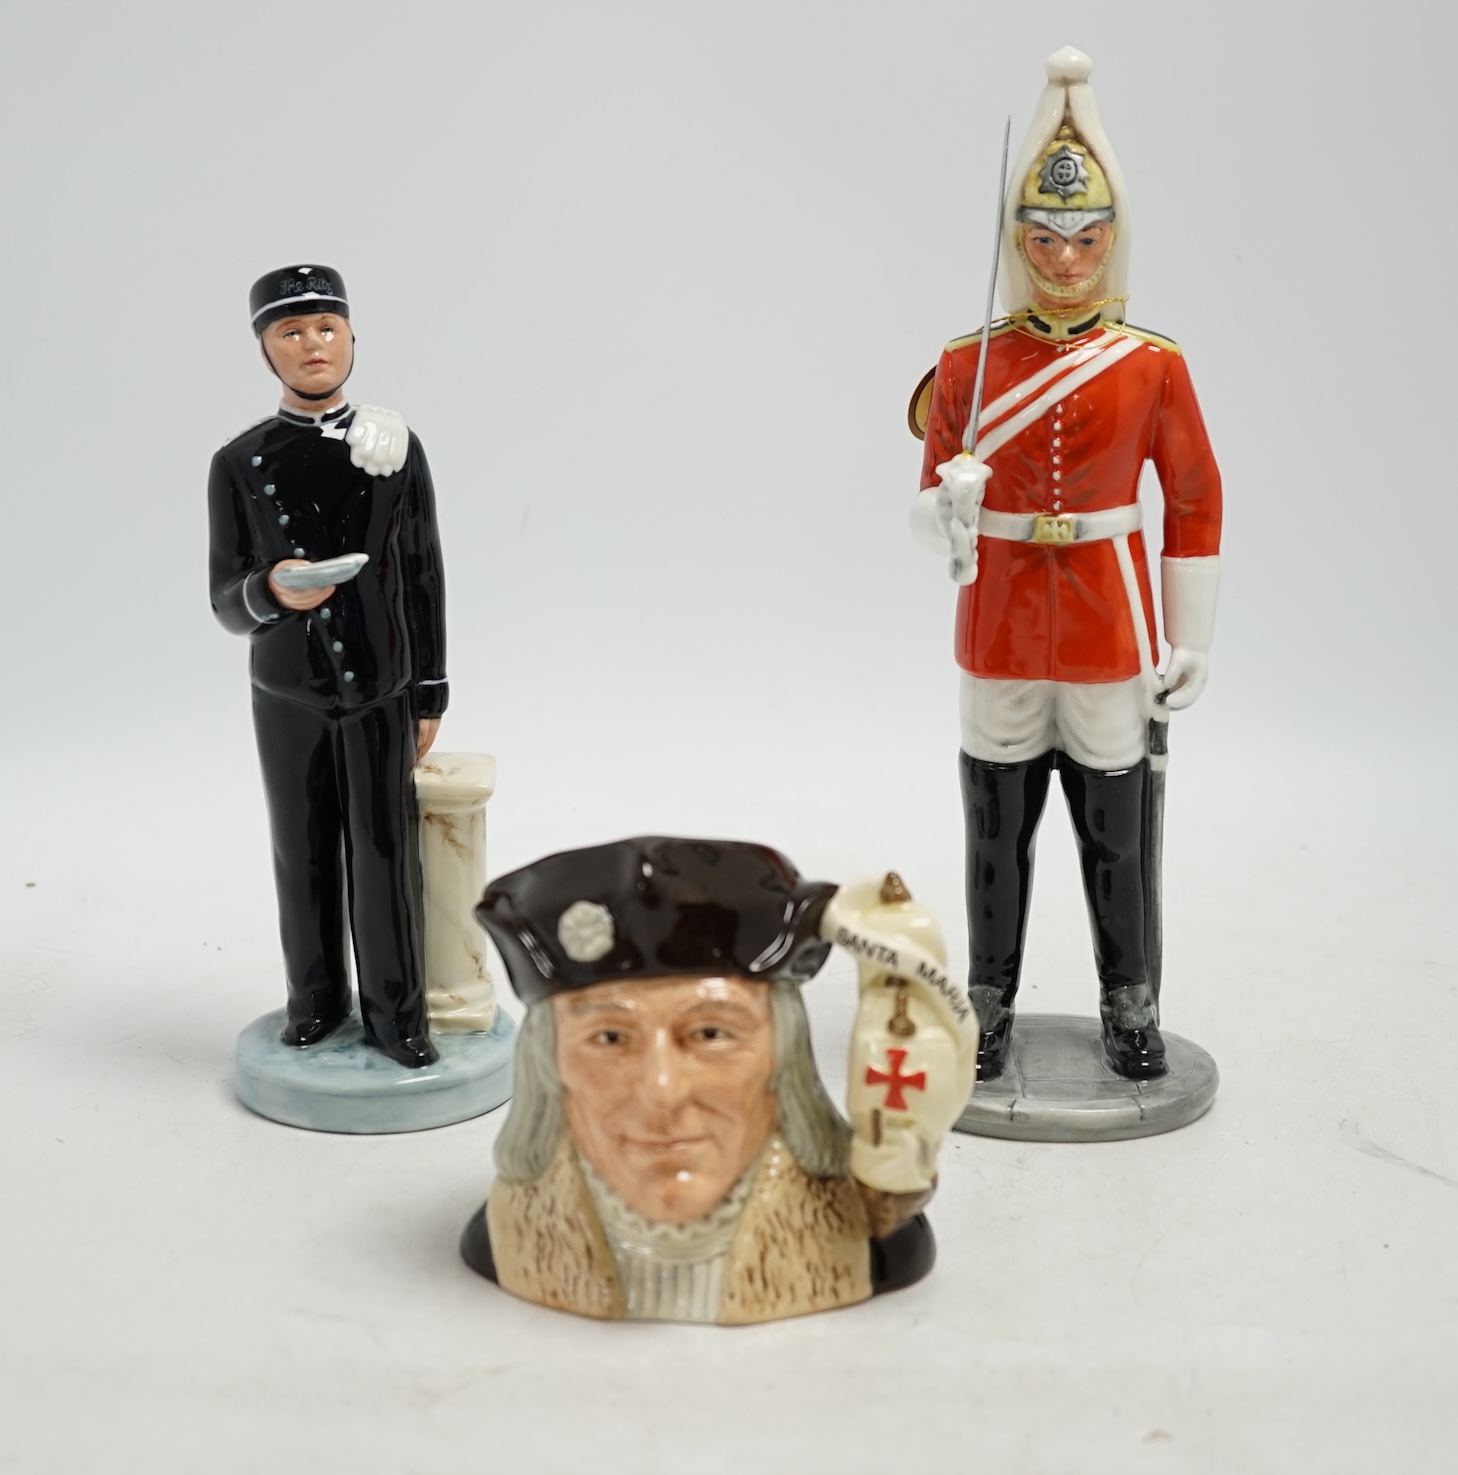 Six Royal Doulton figures including Bunny’s Bedtime, The Guardsman and The Lifeguard, together with a Christopher Columbus Toby jug, all boxed, Guardsman 25cm high. Condition - fair to good